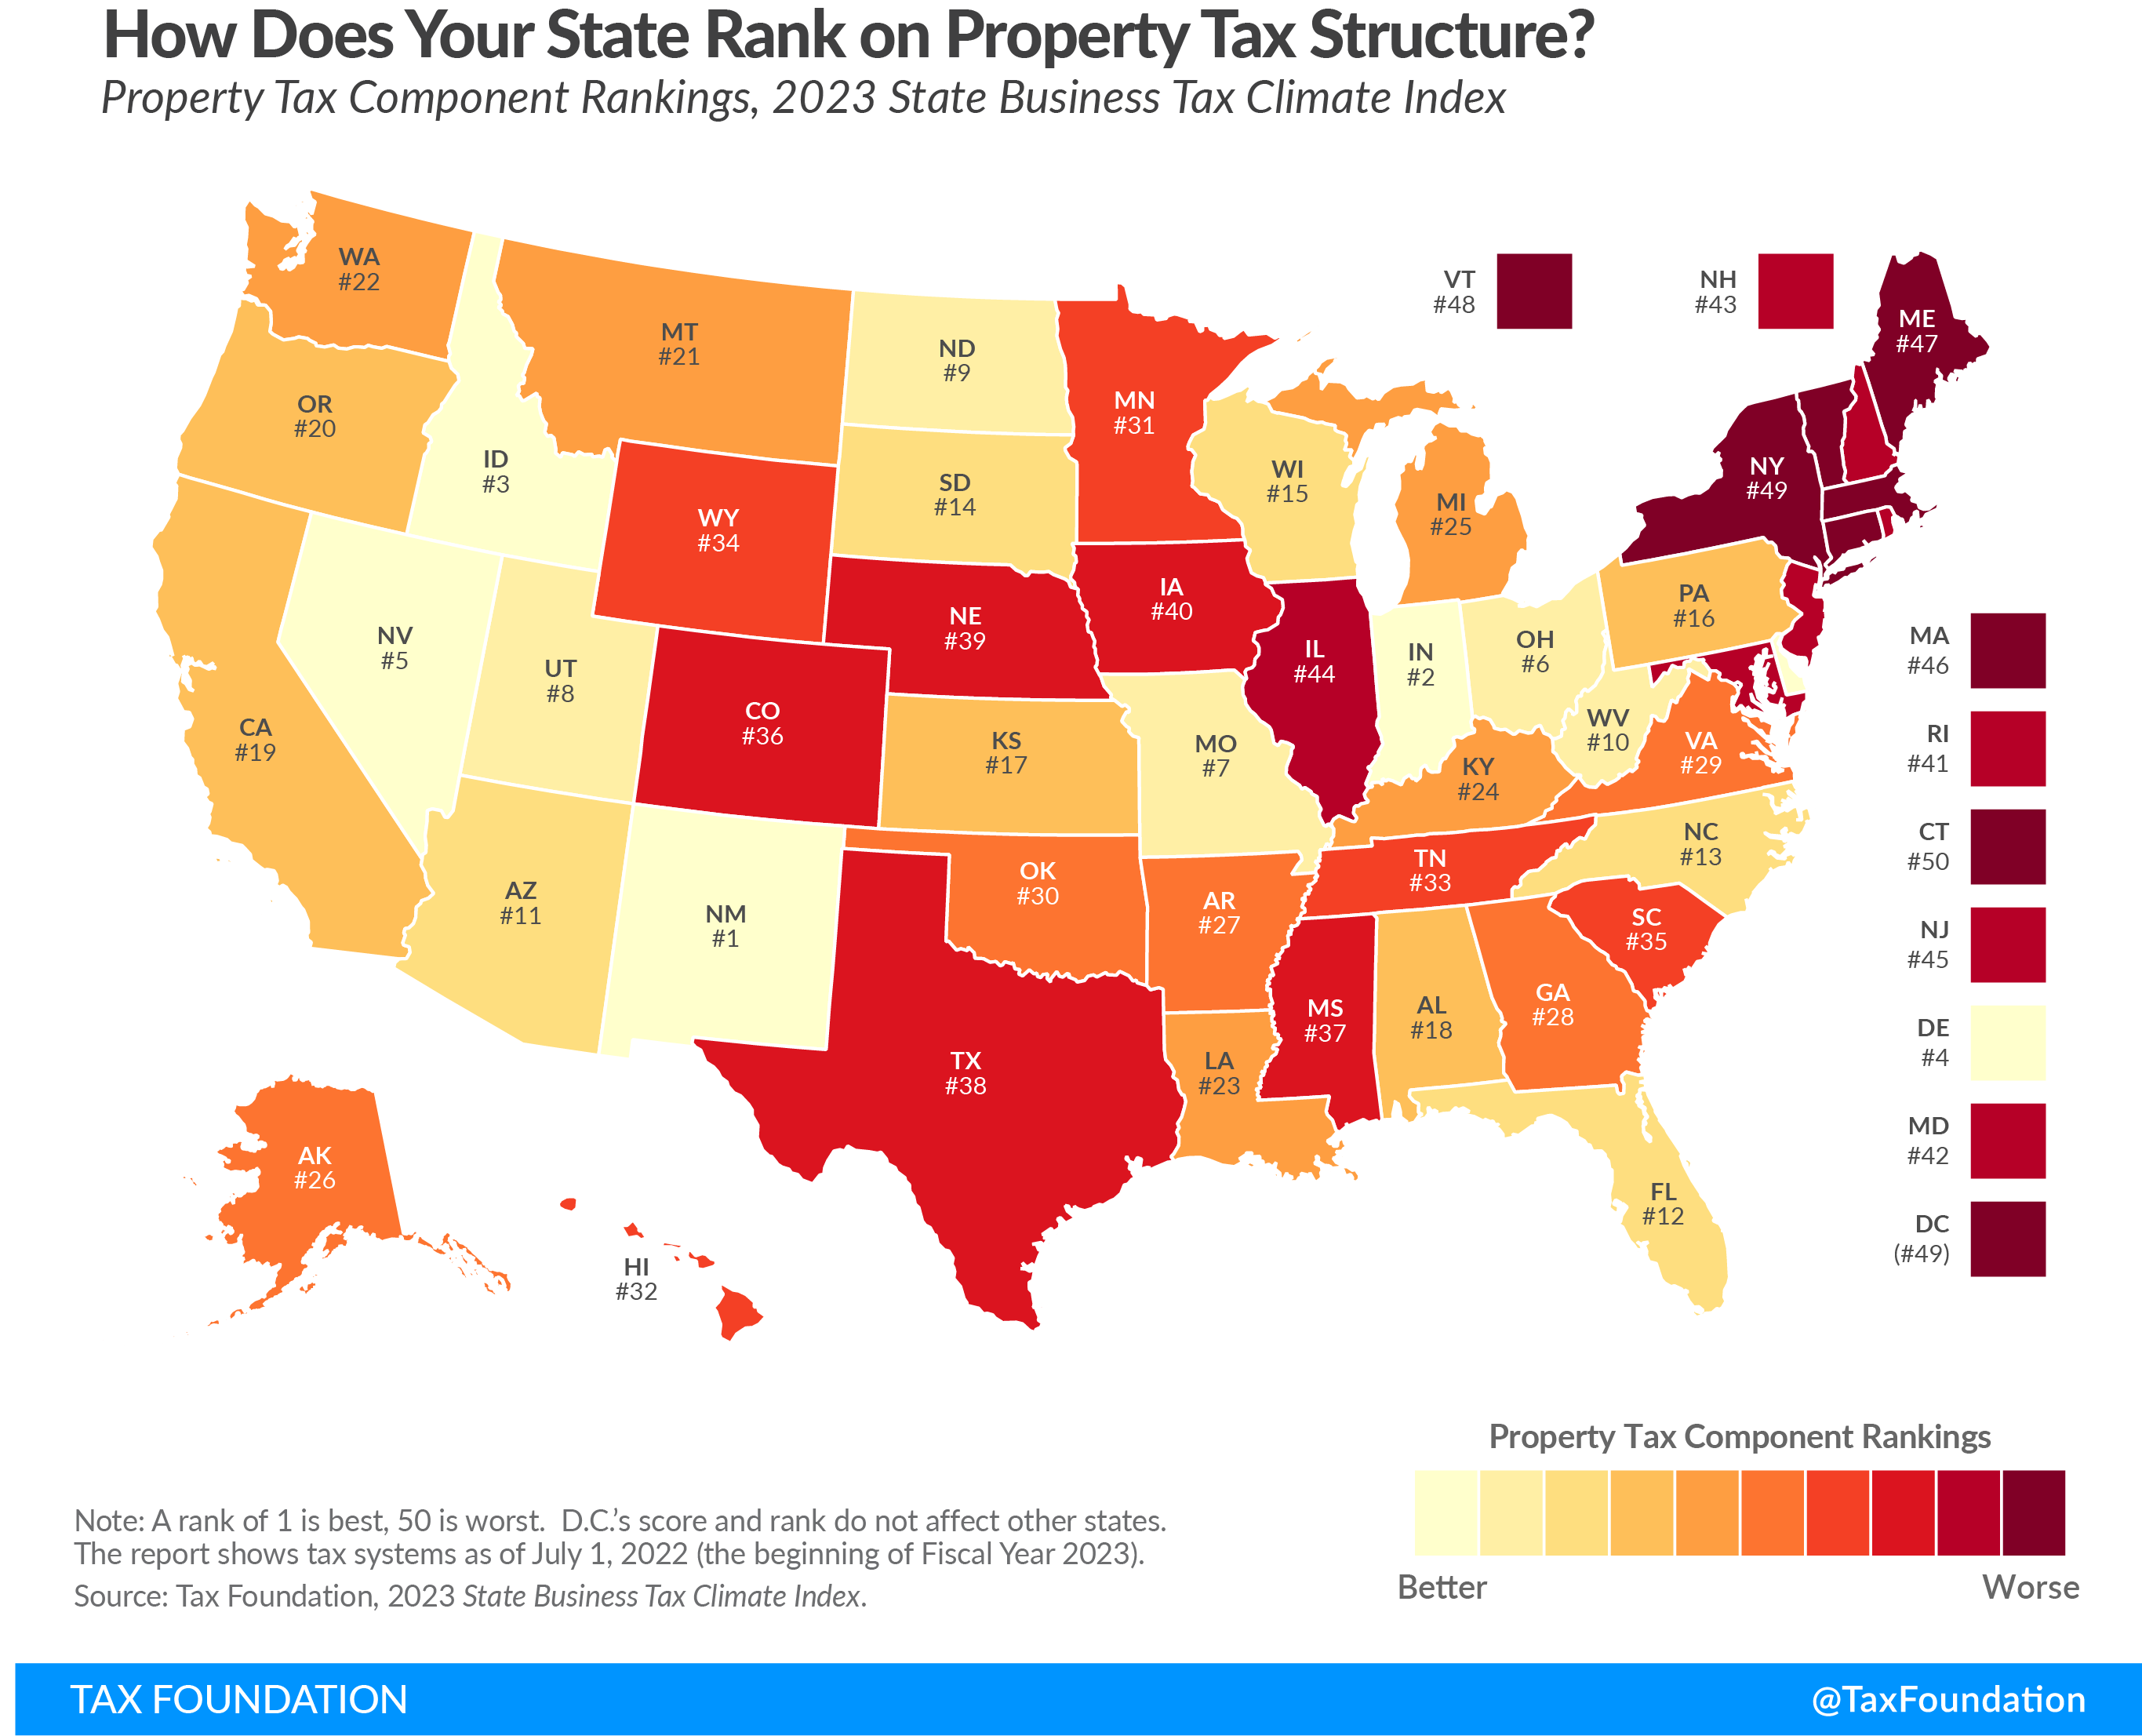 Ranking property taxes by state property tax rank 2023 State Business Tax Climate Index